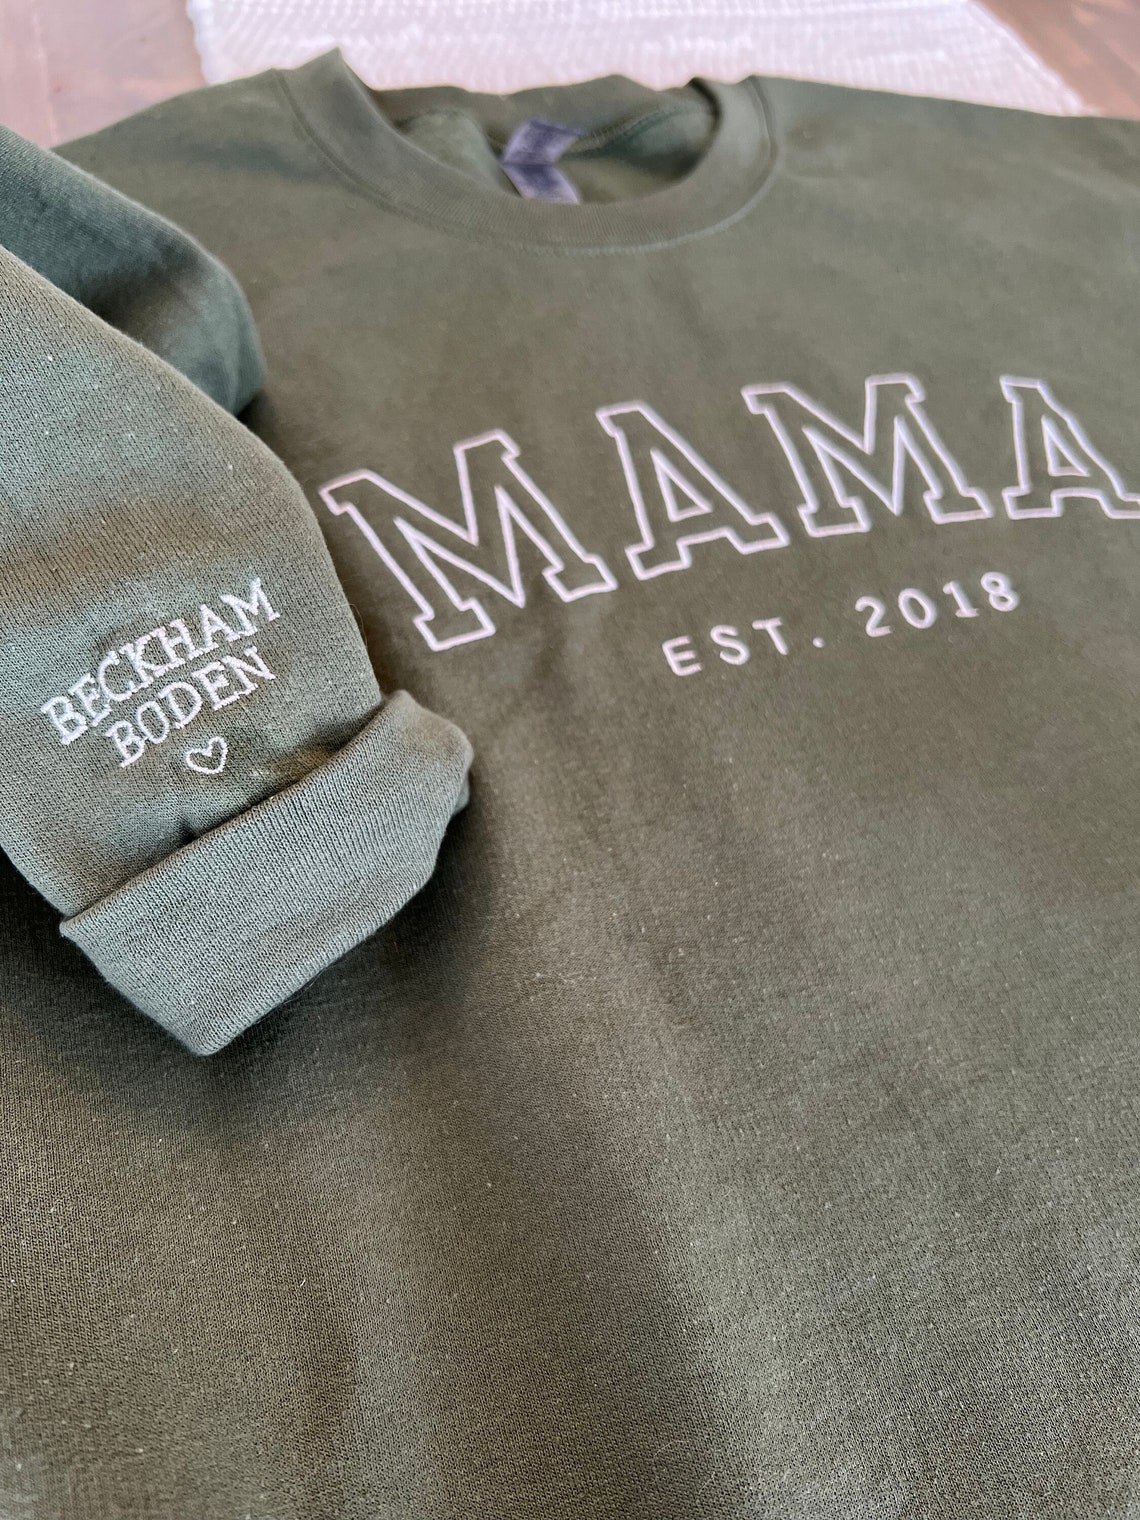 Custom Embroidered Sweatshirt for Mom Personalized Sleeve - Etsy